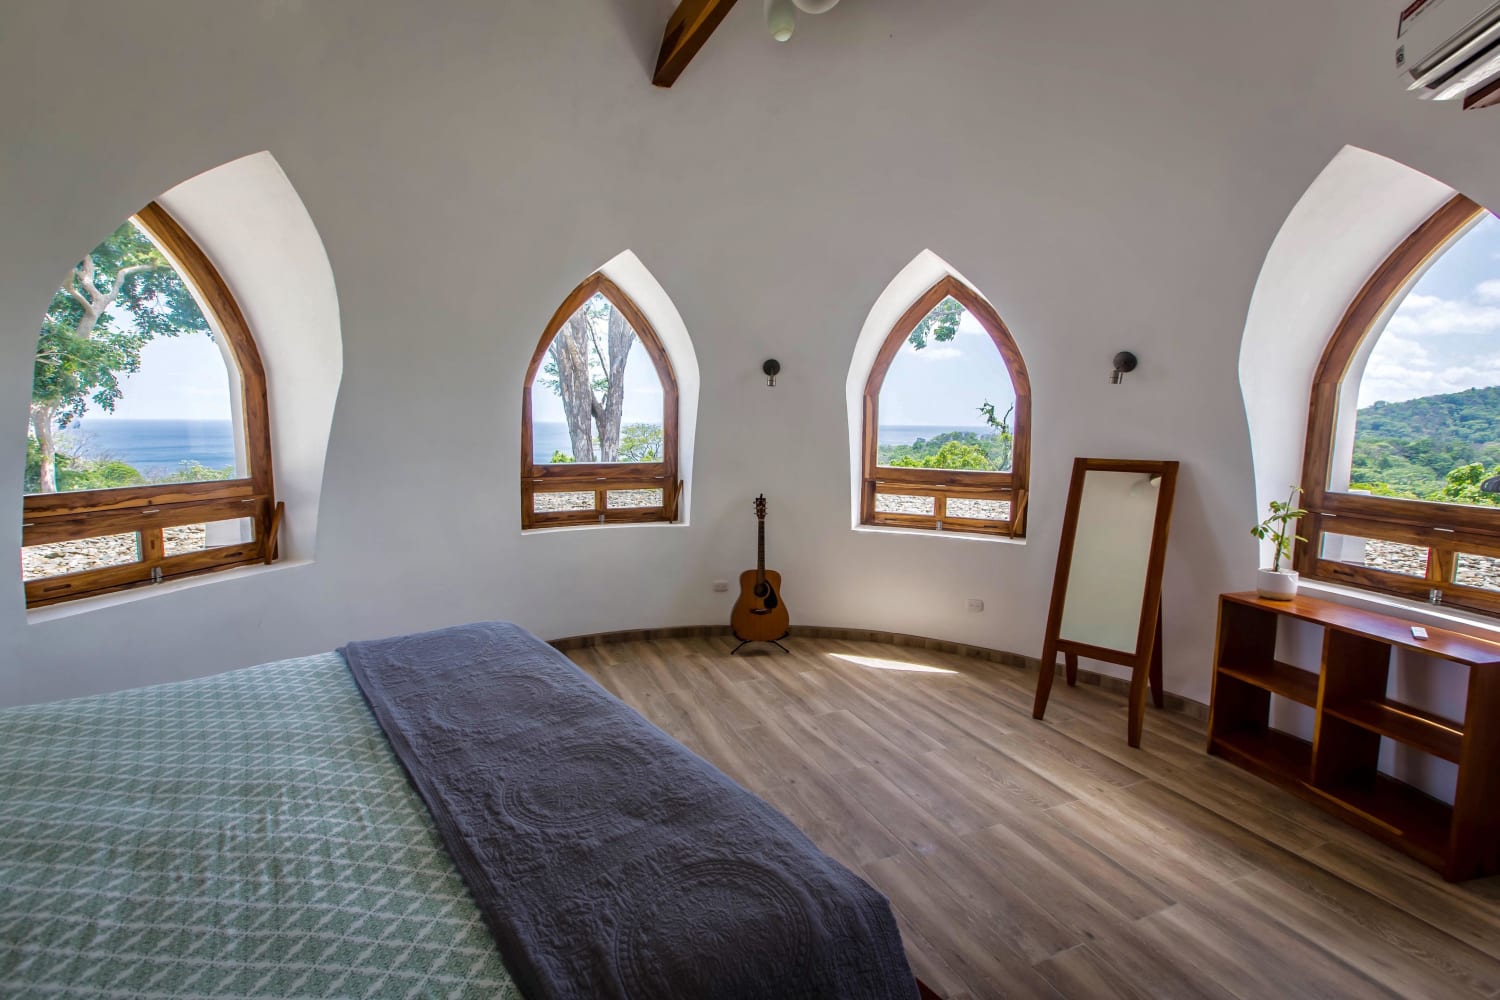 The minimalistic master bedroom of our superadobe dome home in Nicaragua